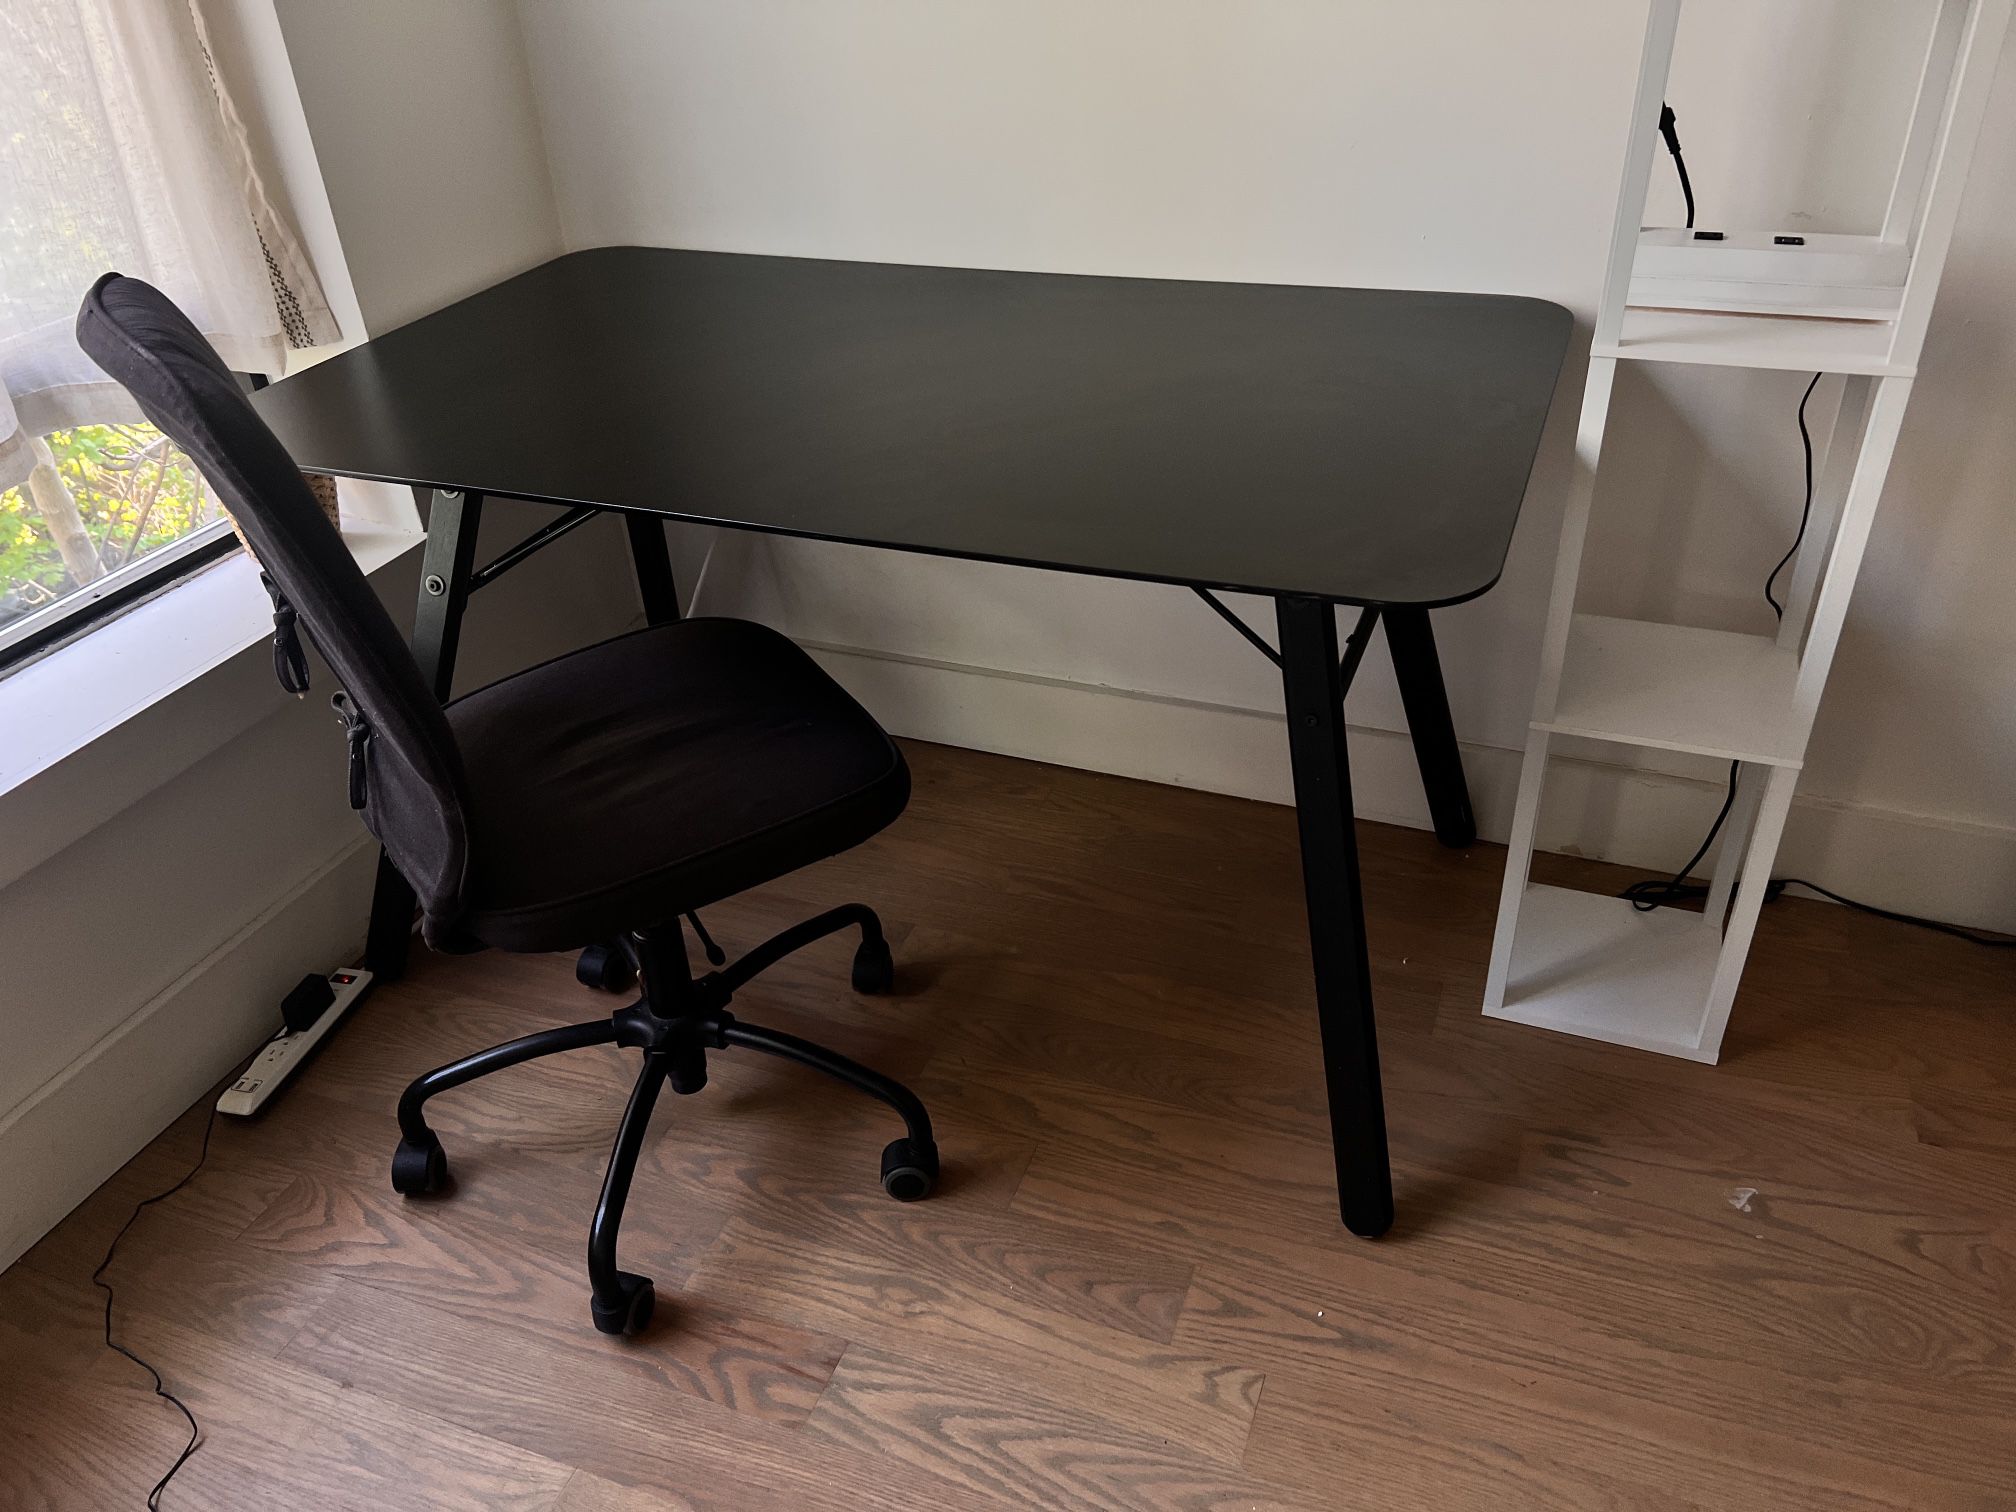 Desk(31x52) and Chair ($100)